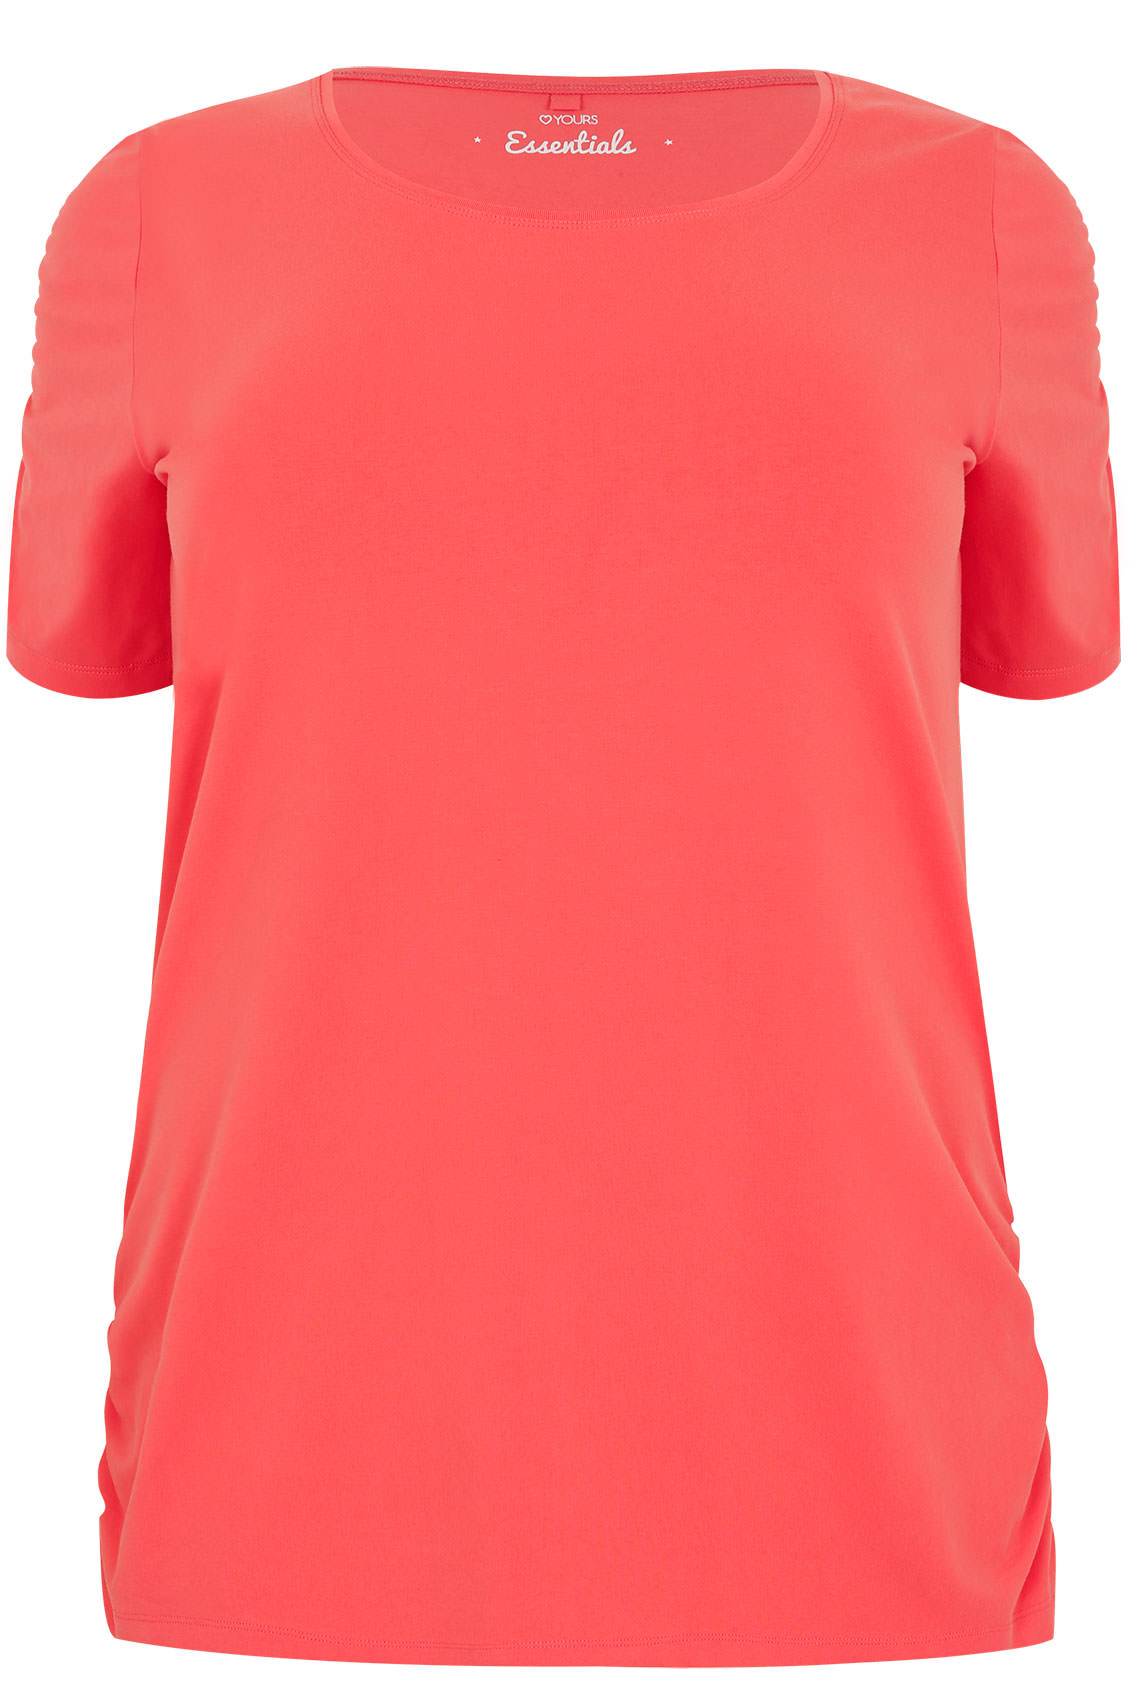 Coral T-Shirt With Ruched Short Sleeves, Plus size 16 to 32